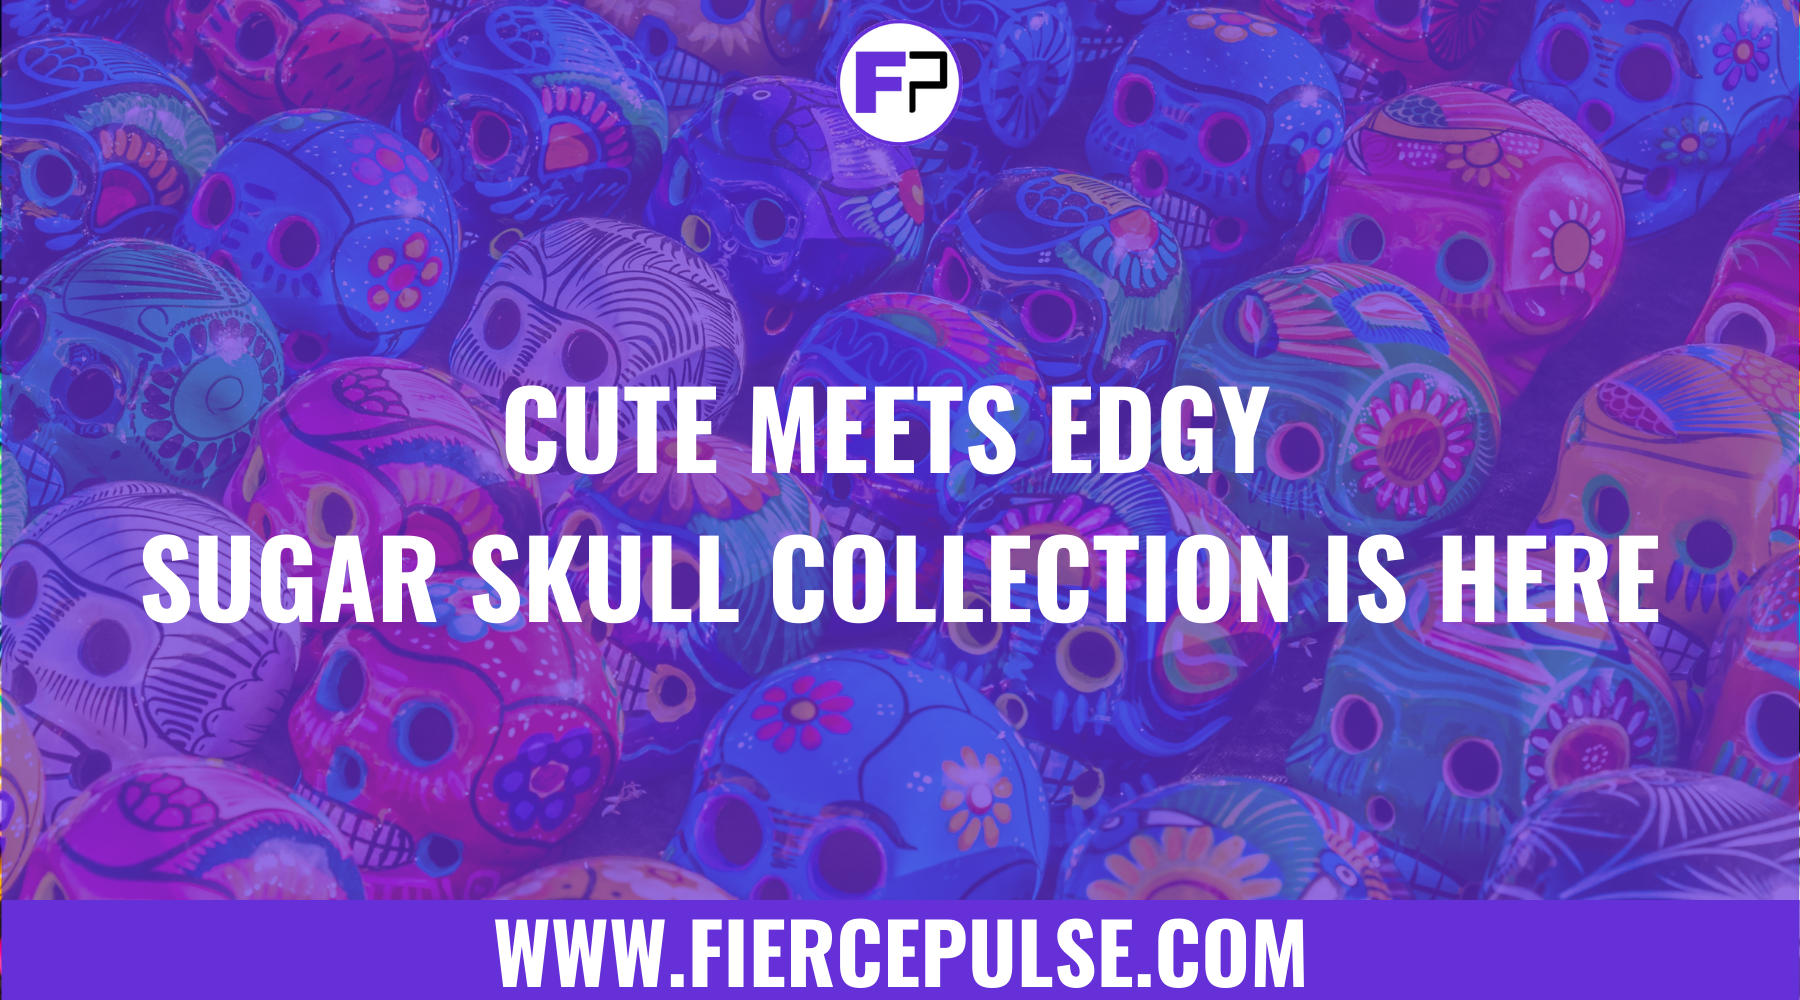 Cute Meets Edgy - Sugar Skull Collection is Here!